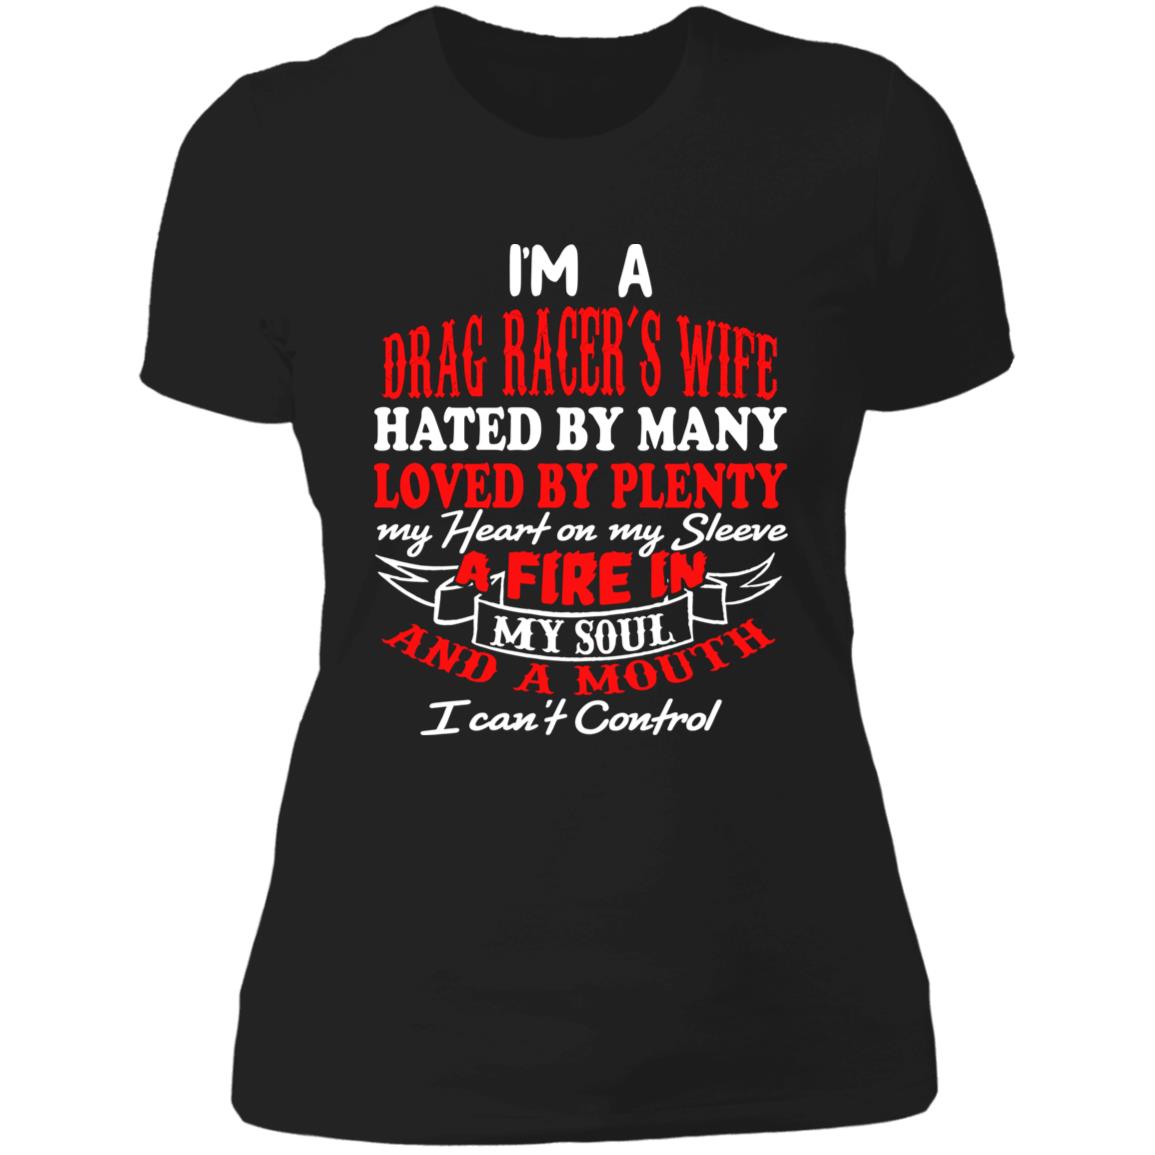 I'm A Drag Racer's Wife Hated By Many Loved By Plenty Ladies' Boyfriend T-Shirt